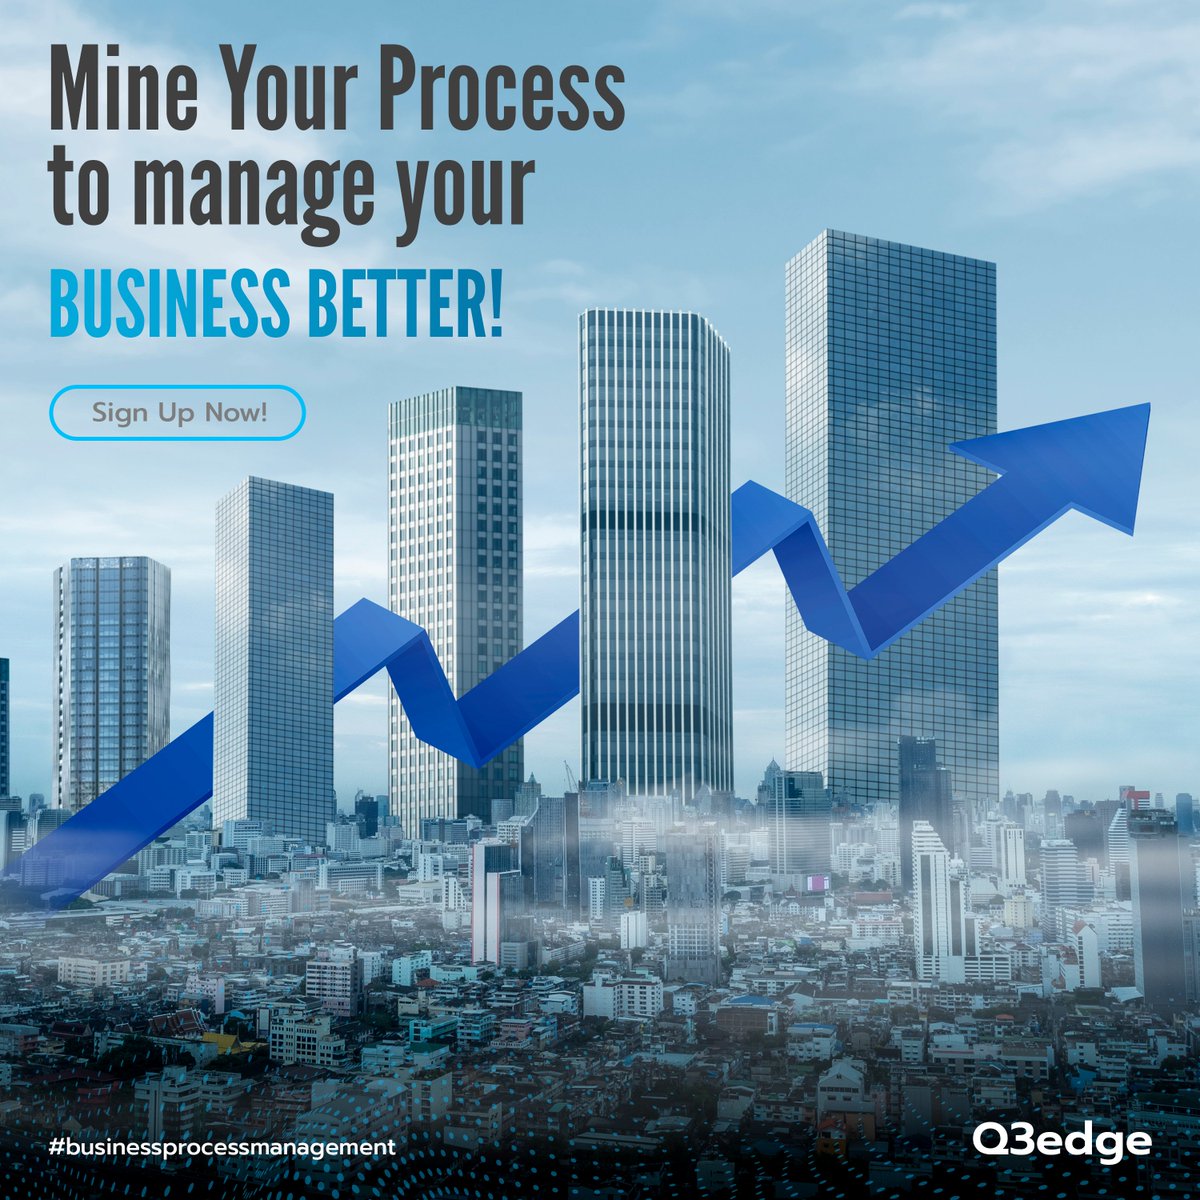 Digging into the depths of your process leads to golden insights, paving the way for effective business management. 
.
#q3edge #businessprocess #BusinessOptimization #StrategicMining #businessprocessmanagement #processmining #businessmapping #roboticprocessautomation